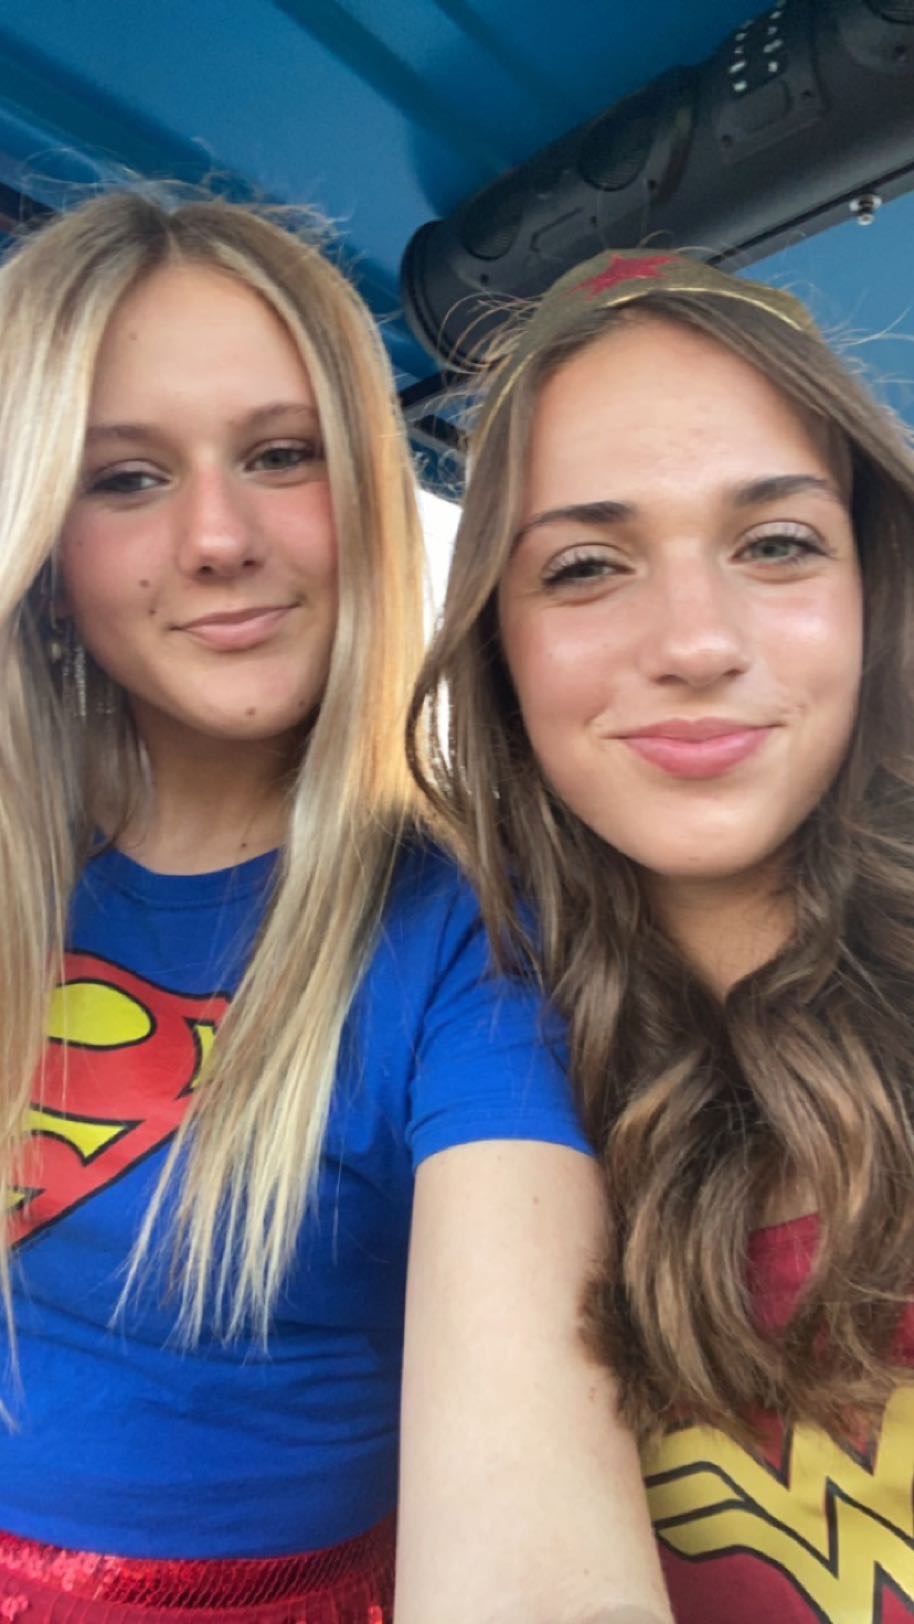 Freshmen Alexa Miller and Allison Poll taking a picture on Halloween. Alexa is dressed as Superman and Allison is dressed as Wonder Woman. Alexa stated, Halloween is one of my favorite holidays; I love decorating and finding cute costumes.